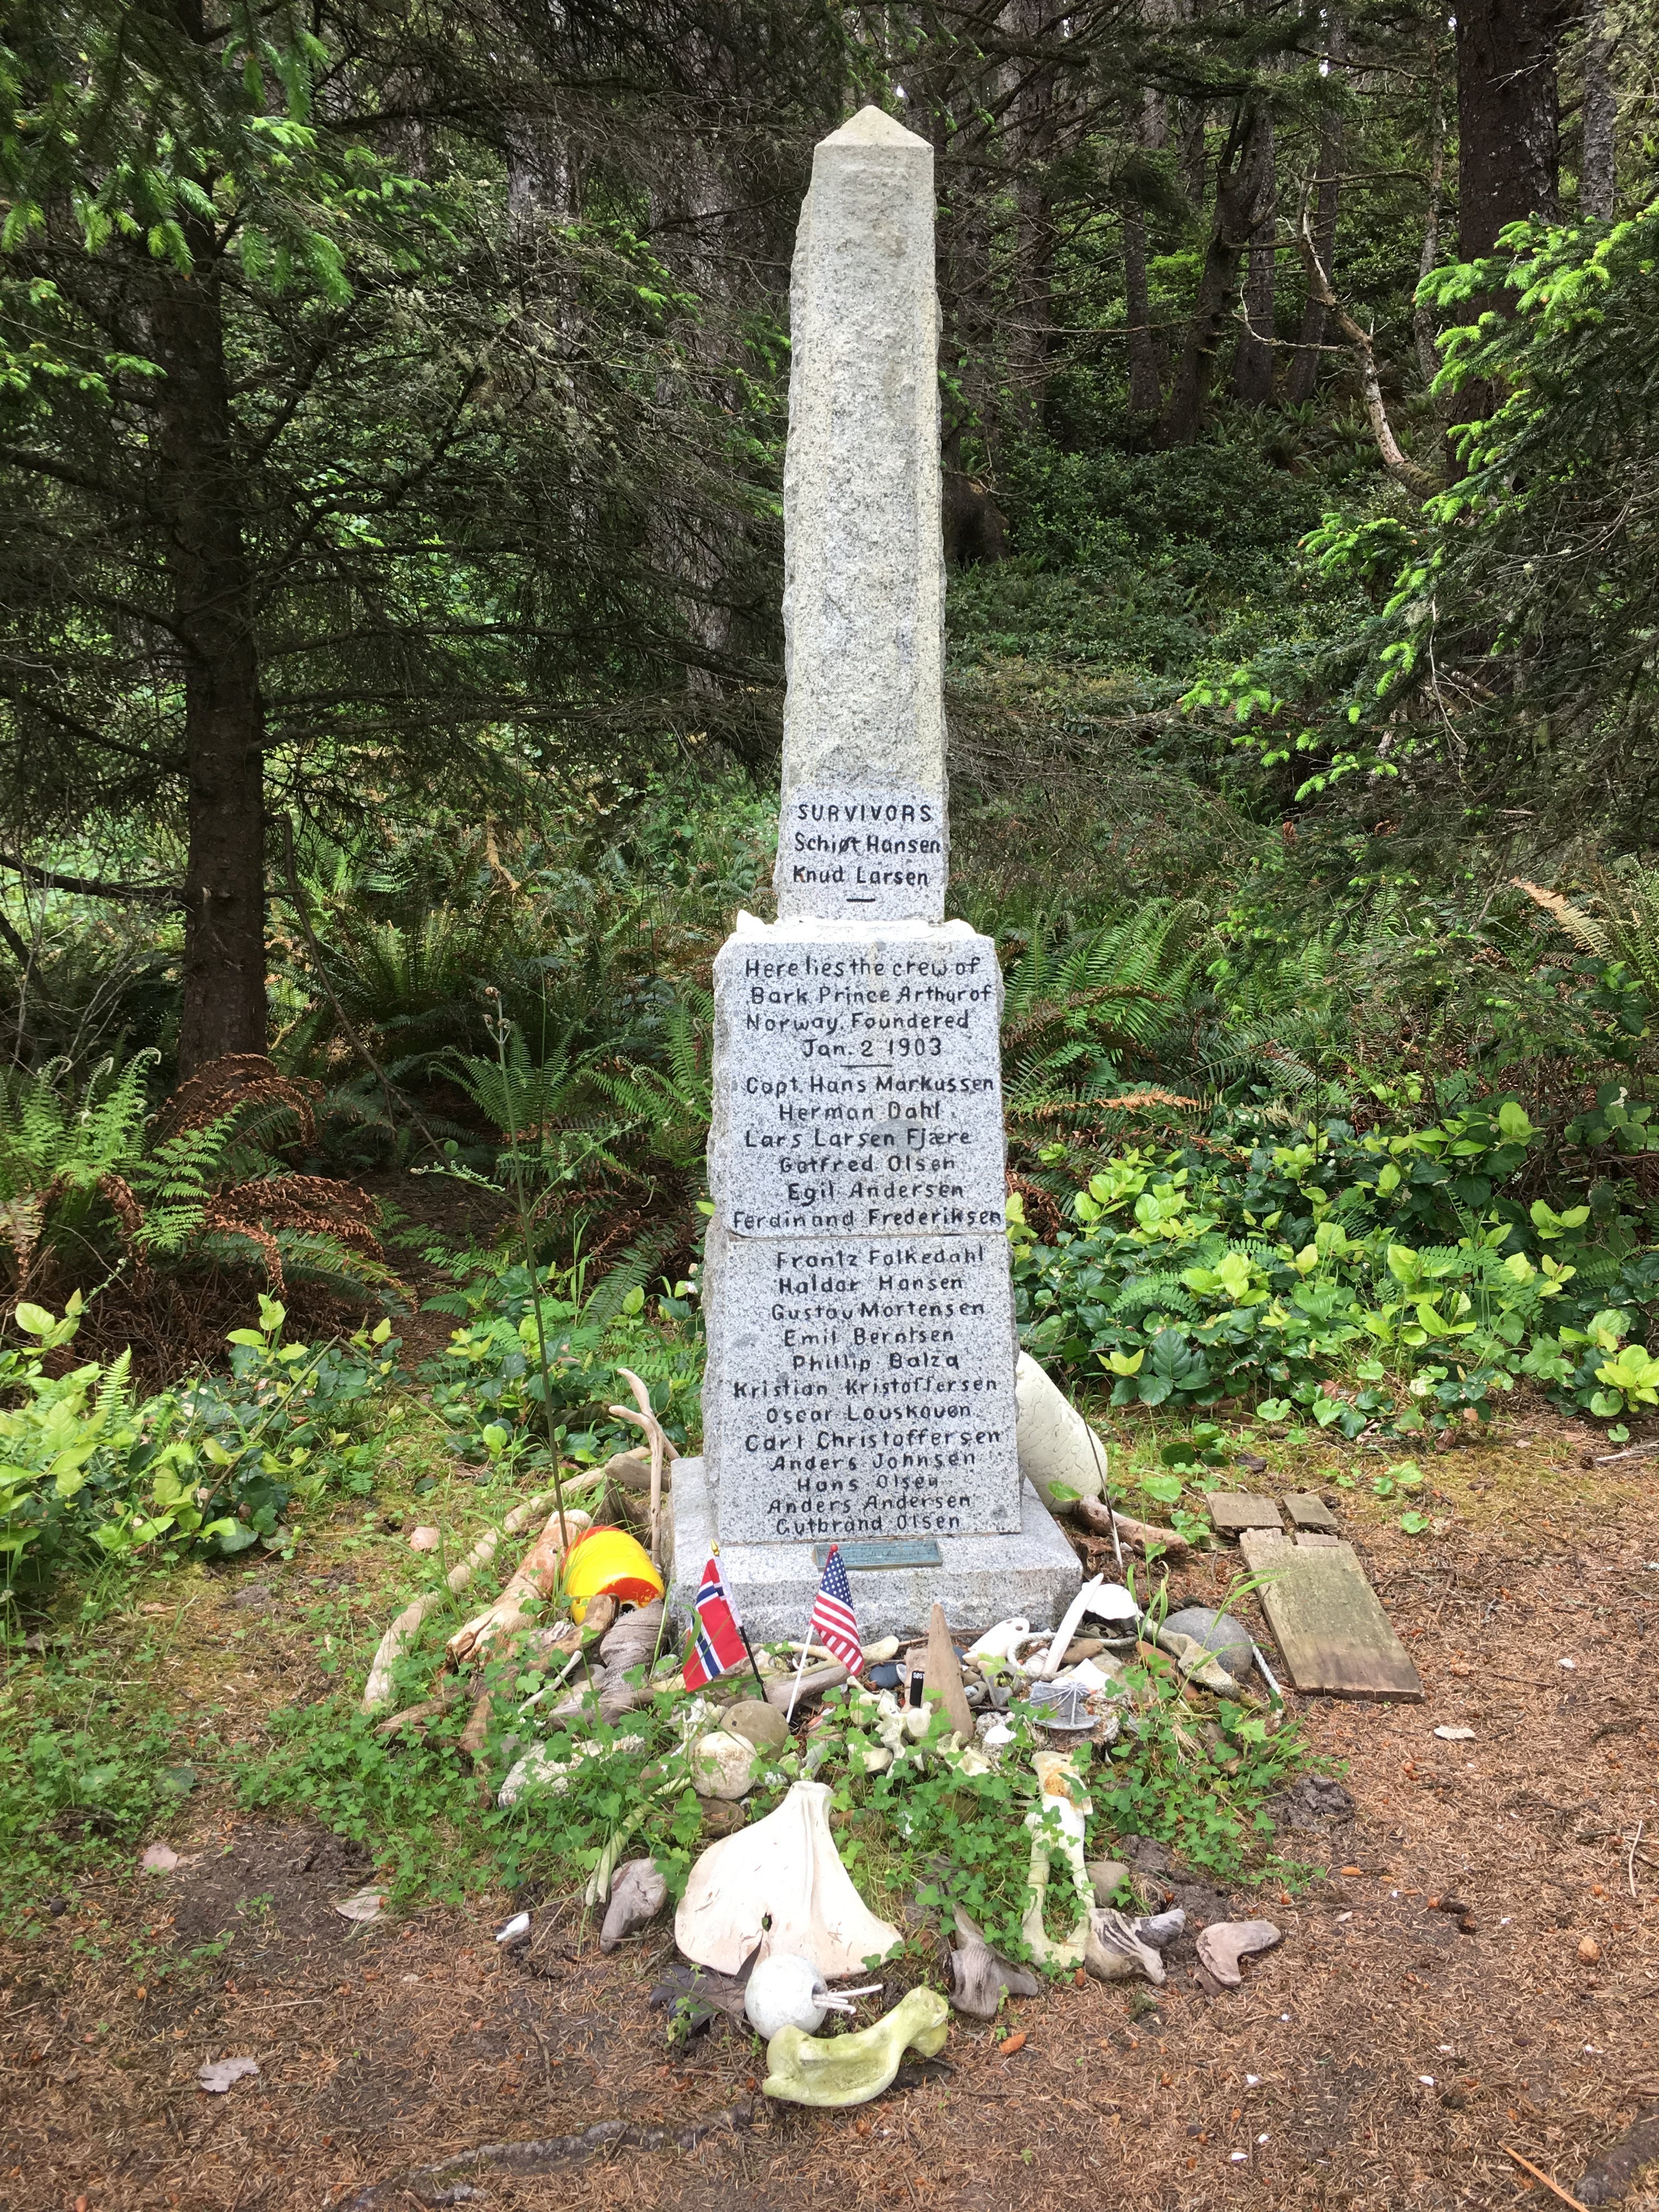 The Norwegian Memorial is tucked into the woods, memorializing those who died in a shipwreck here long ago. We thought about camping here for our third night, but pushed onwards since there was still plenty of daylight.